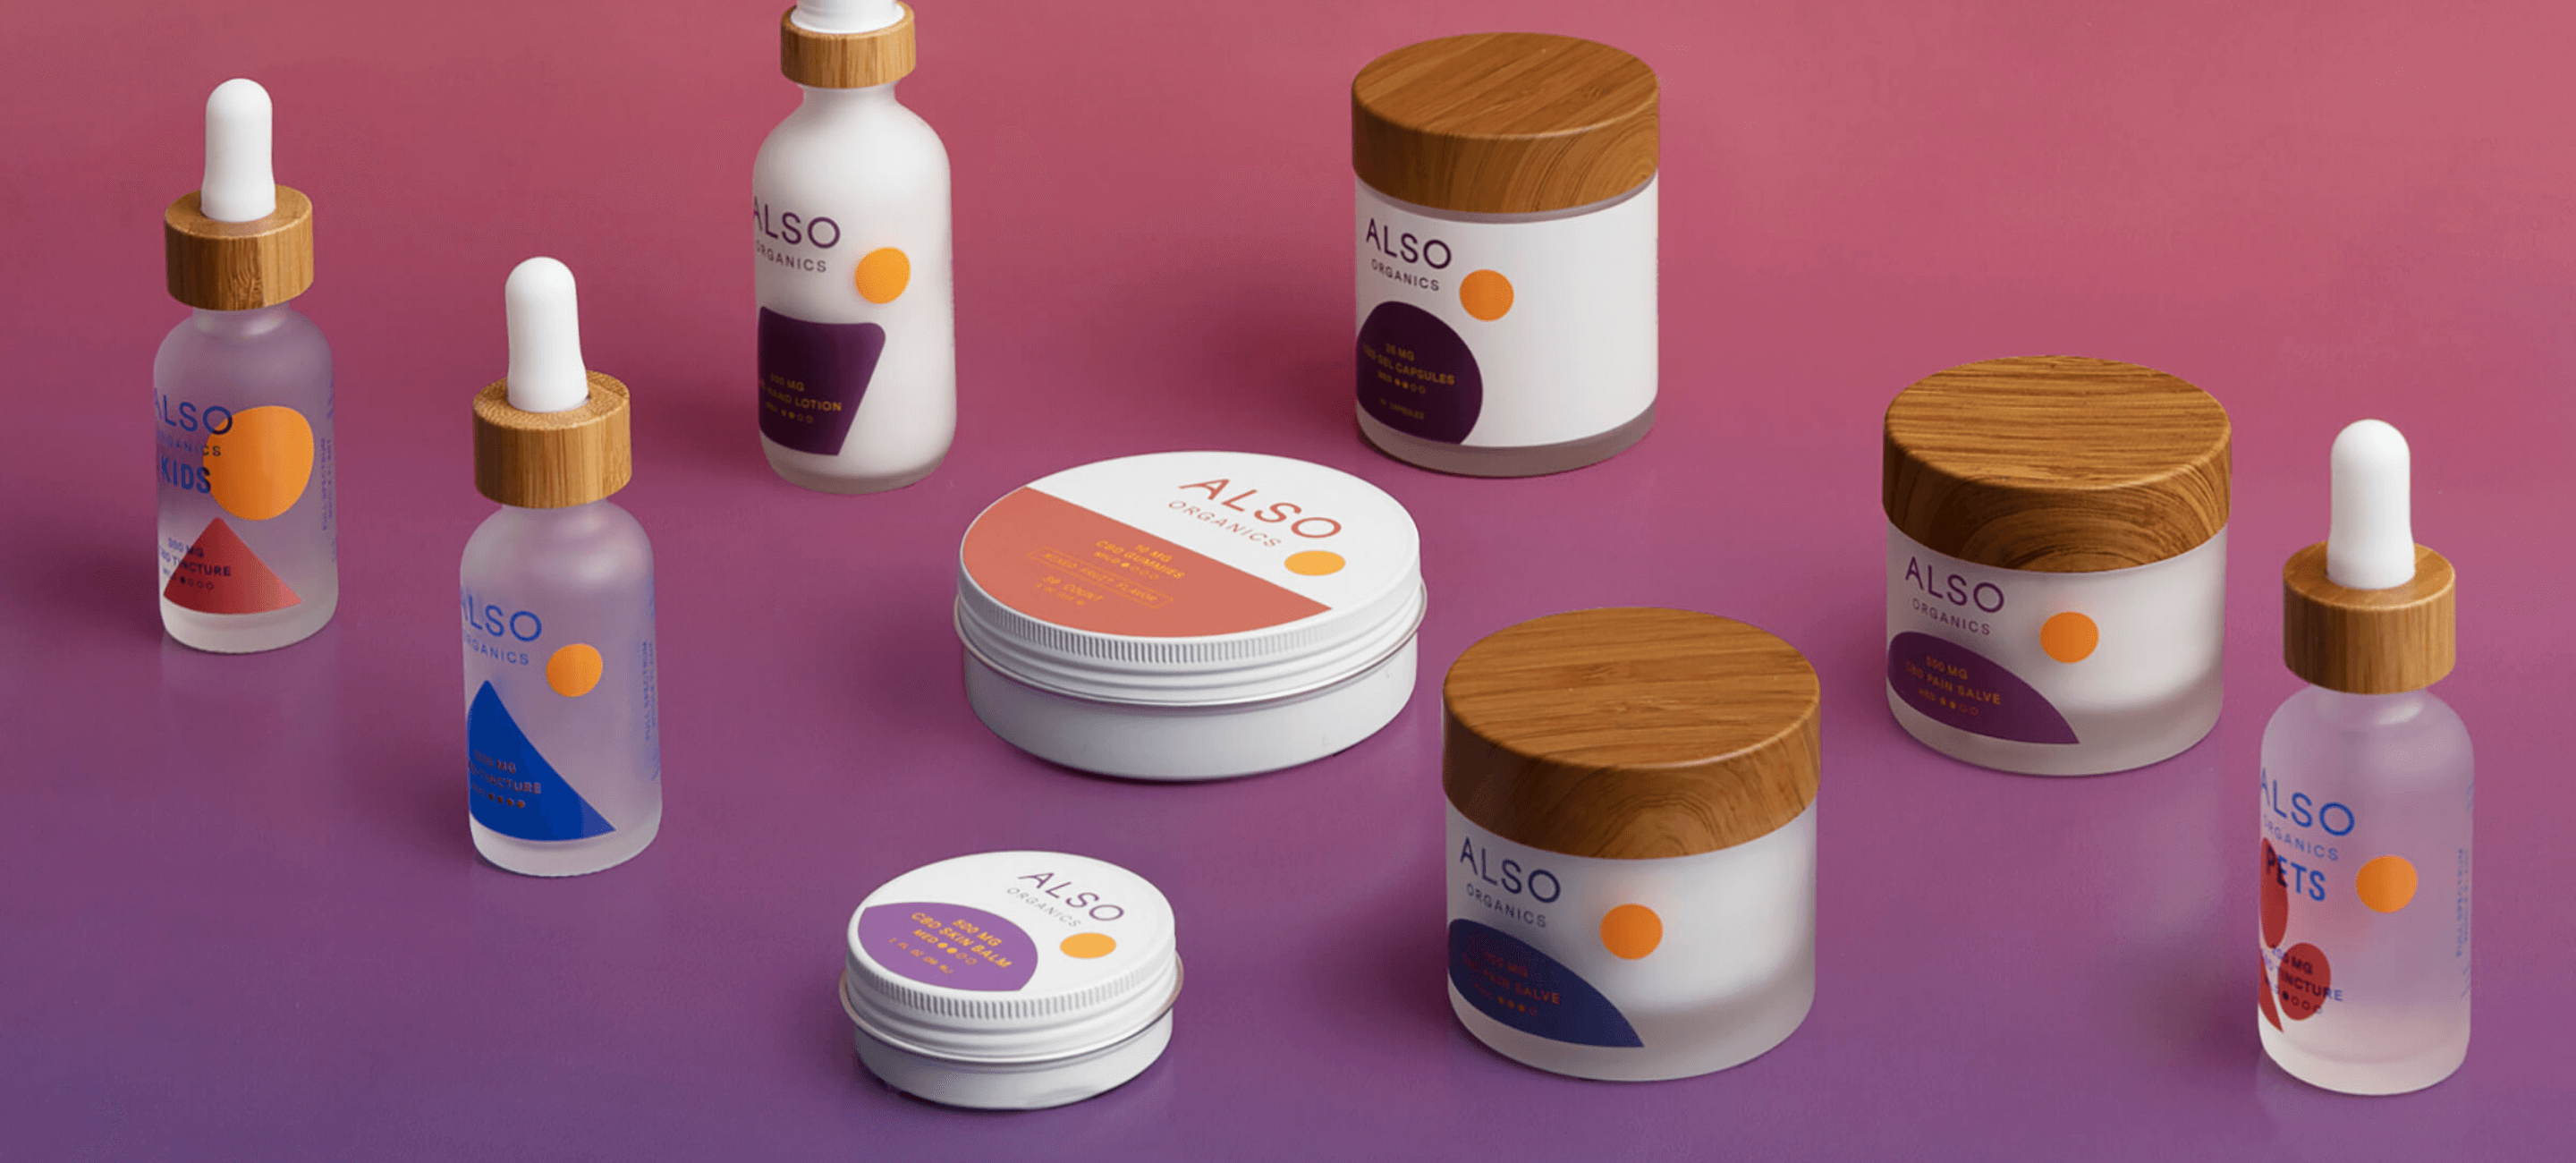 Photo of various Also Organics products including CBD lotion, tinctures, pain salve, skin balm and gummies using an isometric angle on a gradient background